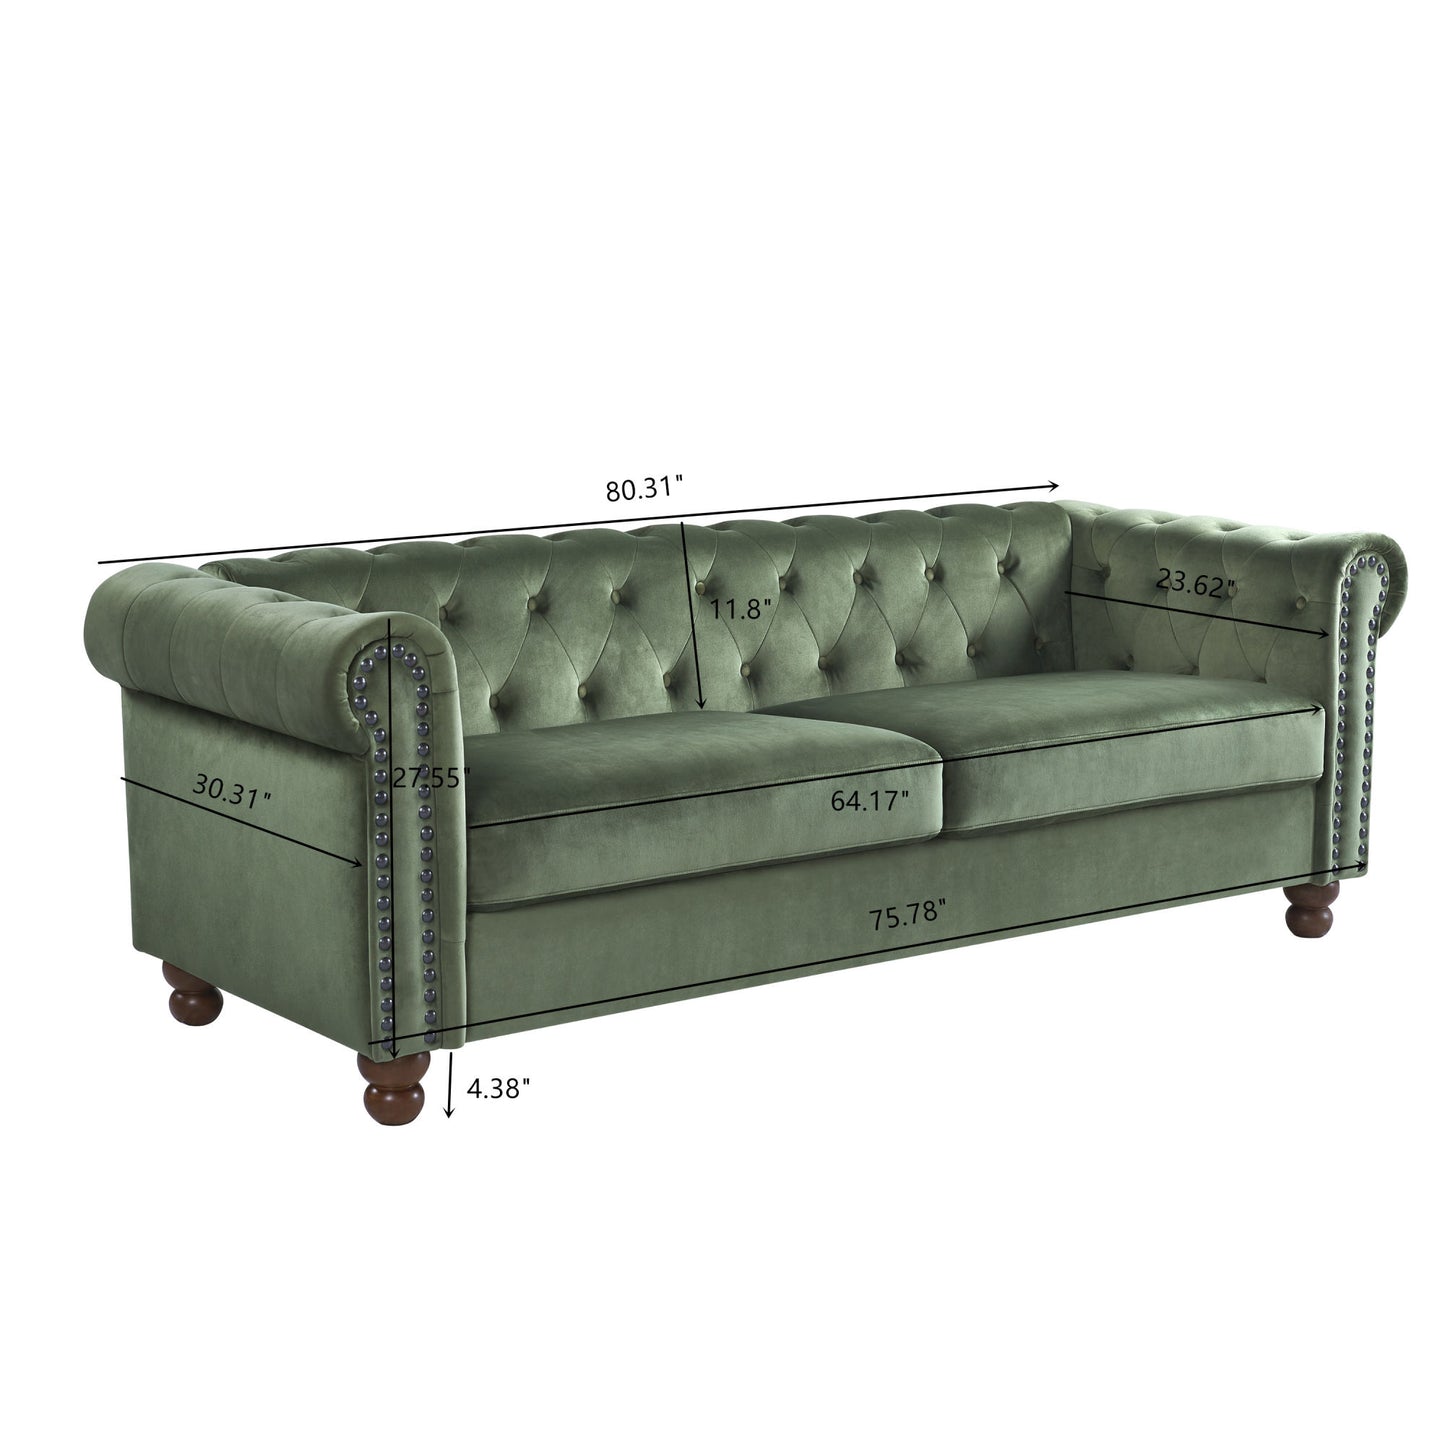 PHOYAL Large Sofa, Velvet Sofa Three-seat Sofa Classic Tufted Chesterfield Settee Sofa Modern 3 Seater Couch Furniture Tufted Back for Living Room (Green)